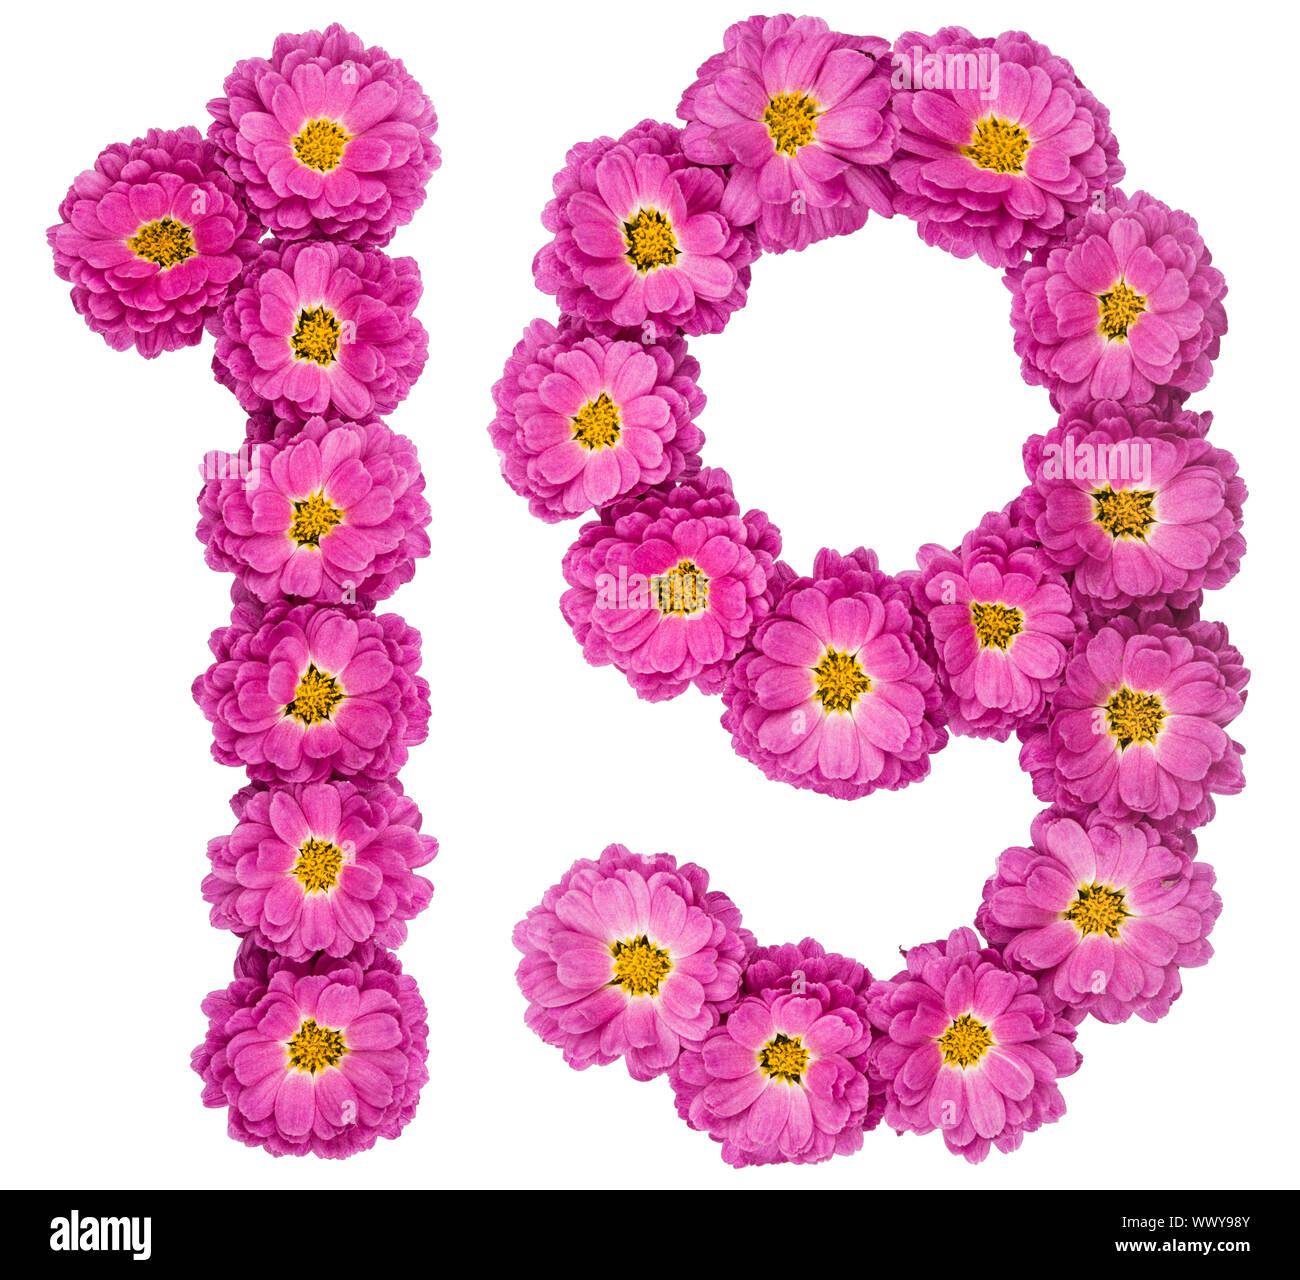 Arabic numeral 19, nineteen, from flowers of chrysanthemum, isolated on white background Stock Photo